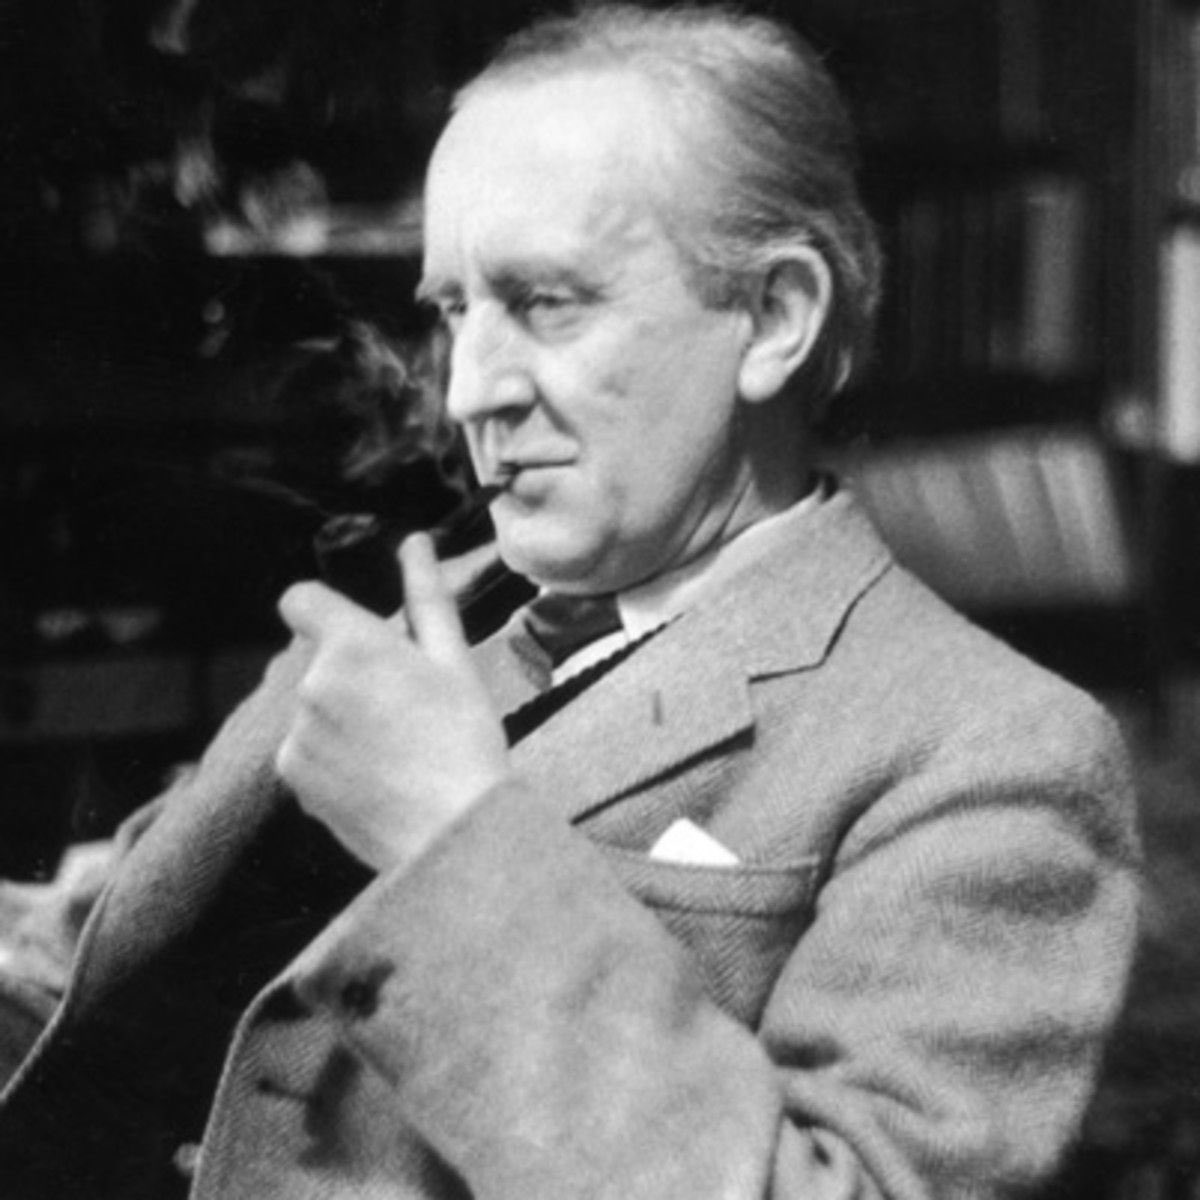 “The world is full enough of hurts and mischances without wars to multiply them.” J.R.R. Tolkien